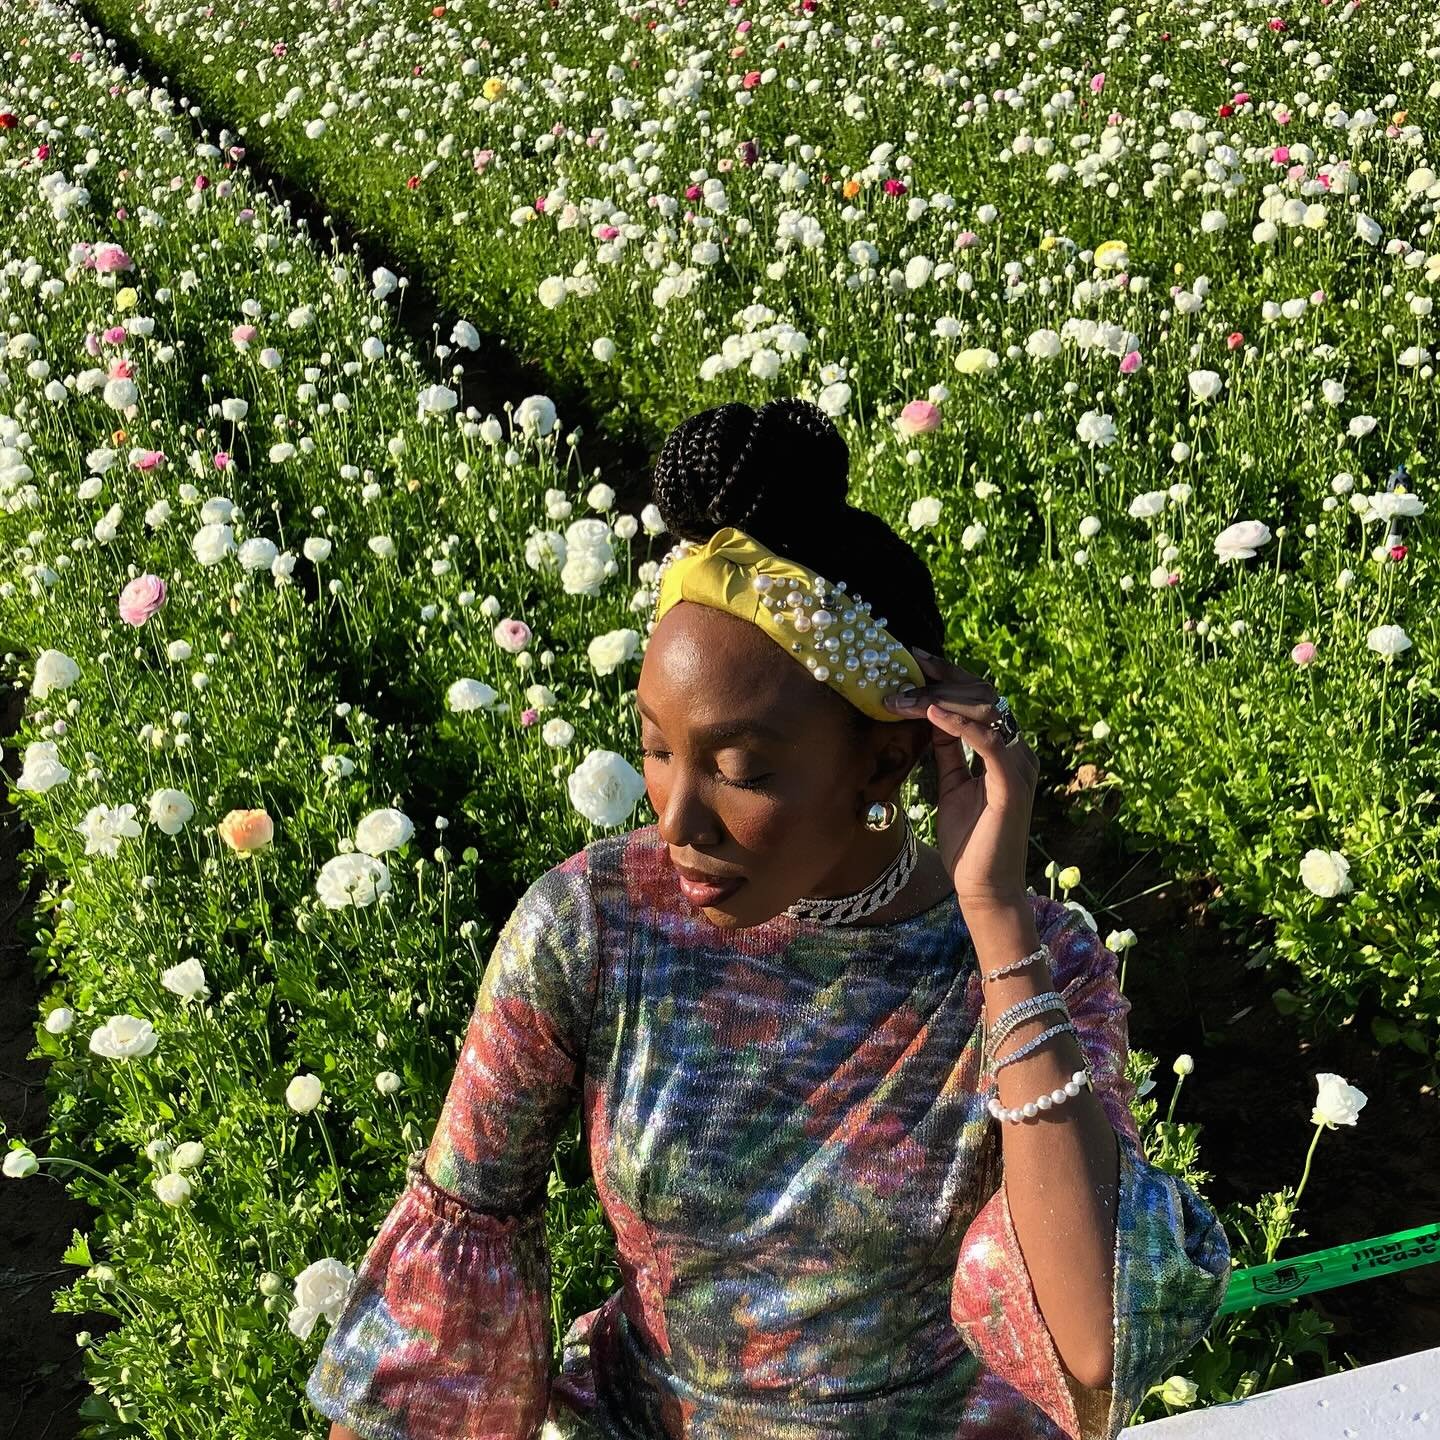 Saturday day @the_flower_fields in Carlsbad🌸 &hellip; I can&rsquo;t believe this was my first time visiting!!! It was so beautiful✨. I definitely recommend checking it out if you haven&rsquo;t had the chance to yet before the season is over. They ha